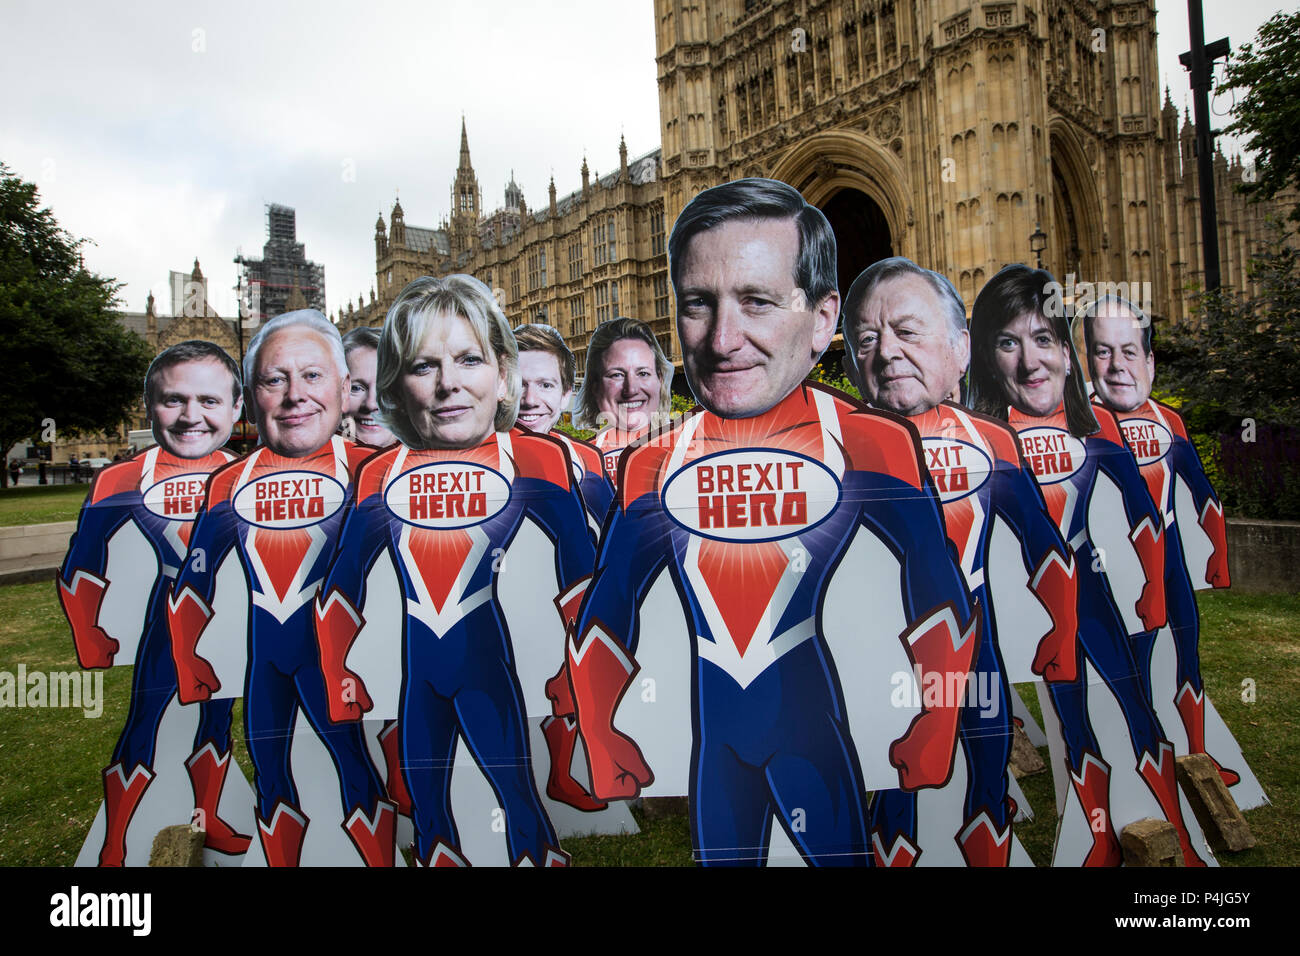 15 superhero cutouts with faces of key Tory rebel MPs outside Parliament ahead of Wednesday's Commons vote to give Parliament a vote on Brexit. Stock Photo